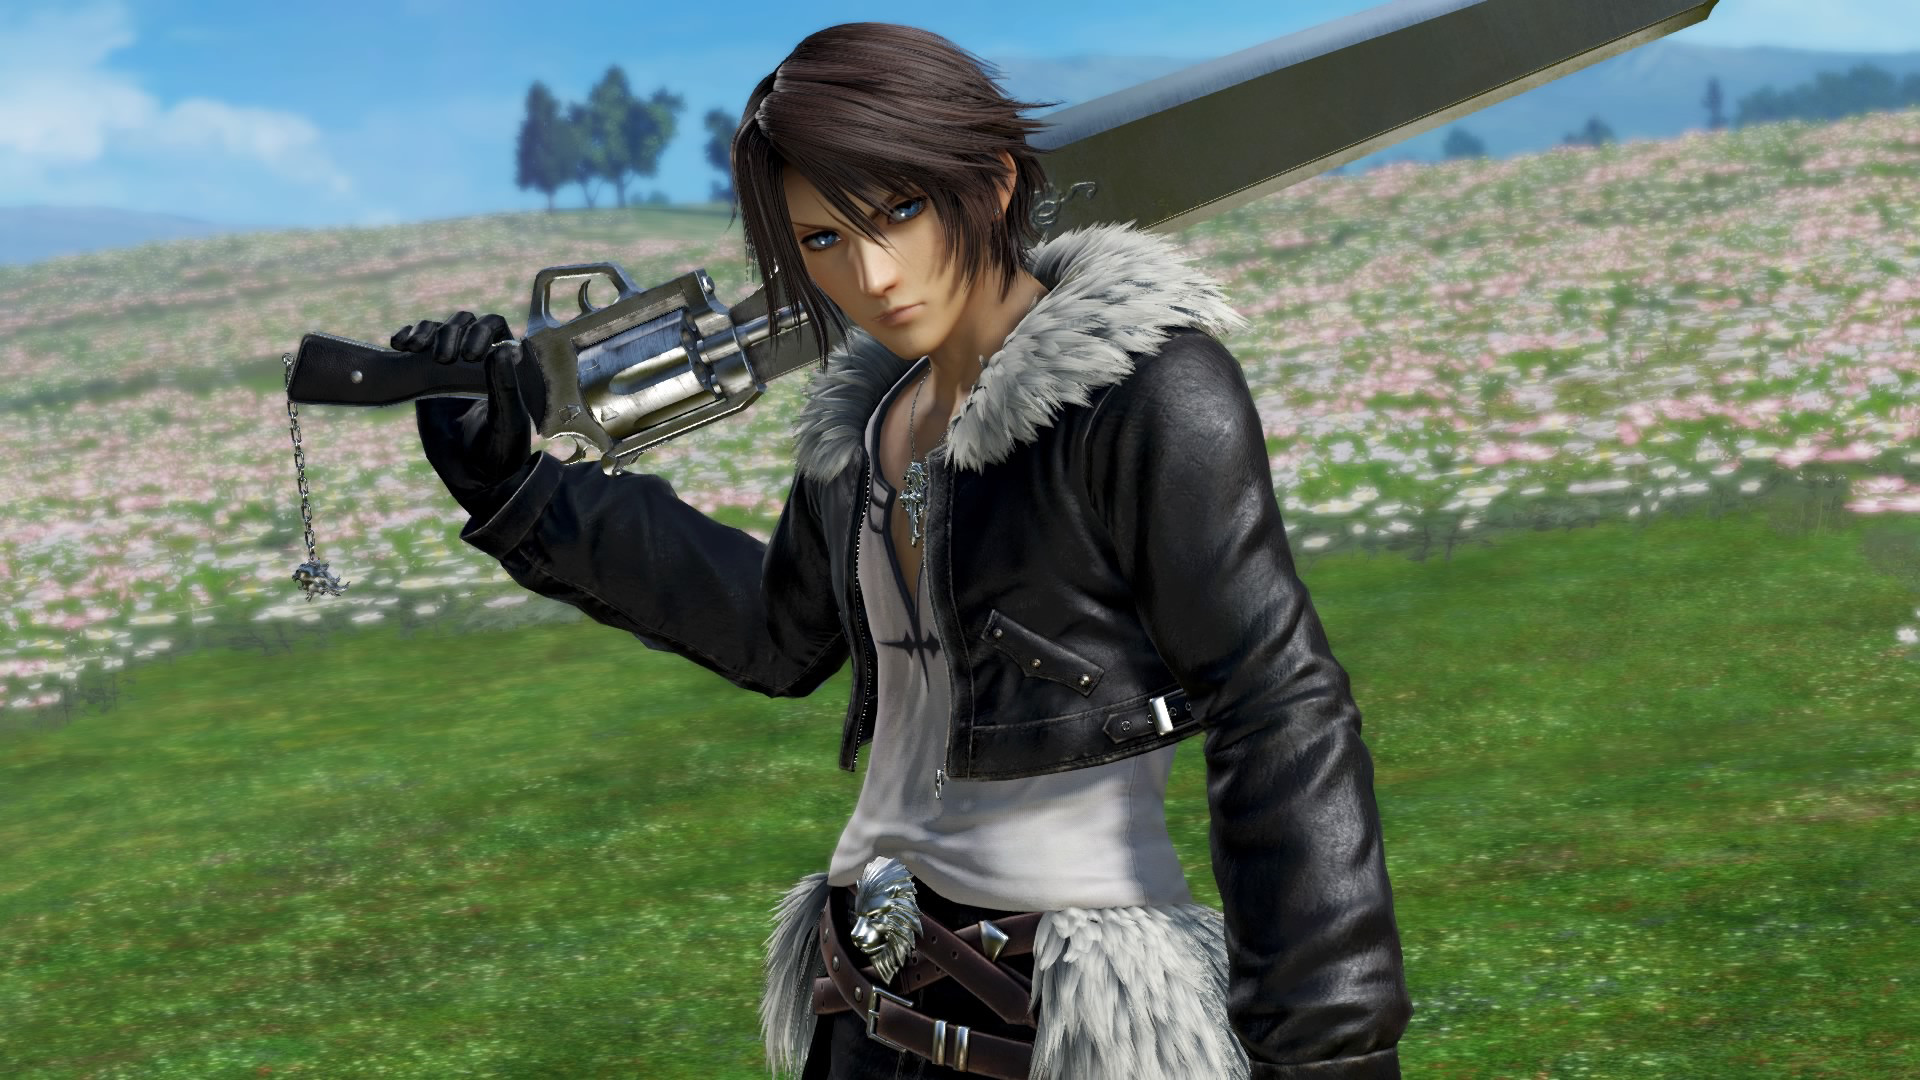 Bad Video Game Heroes - Squall